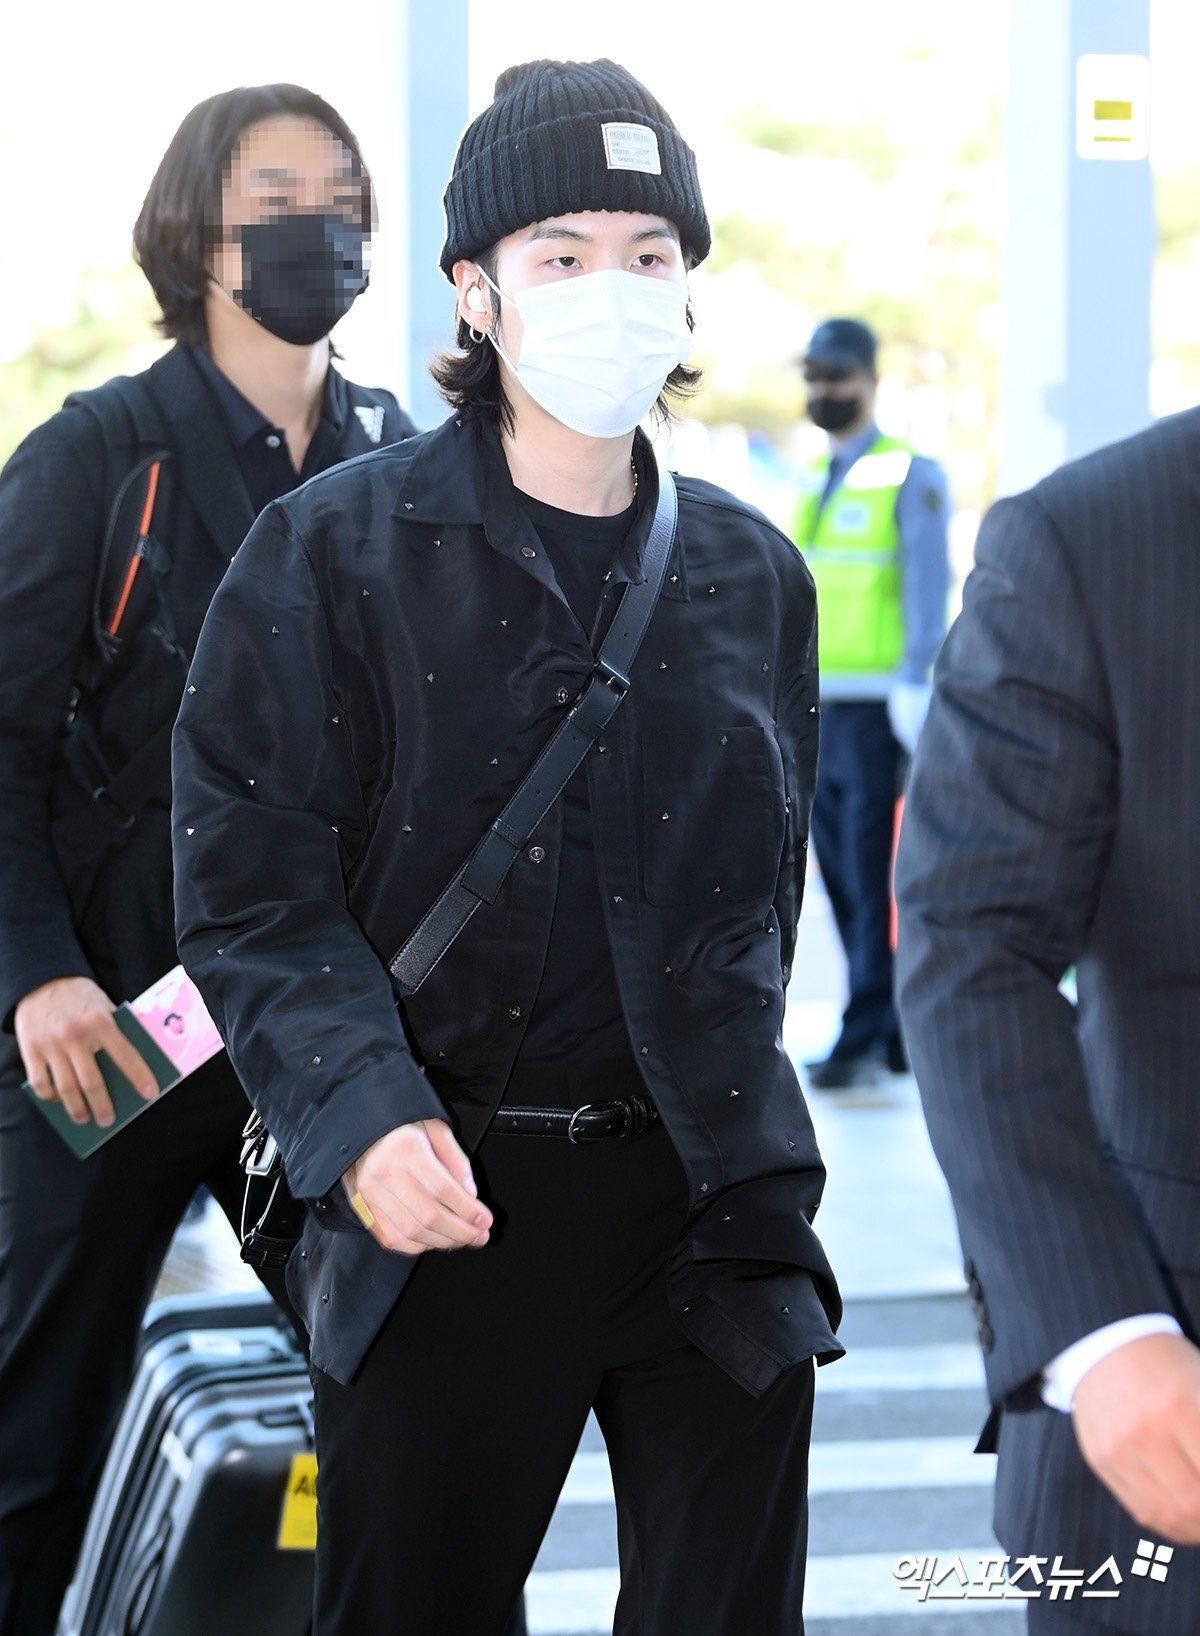 SUGA UPDATES ⟬⟭ on X: Bless winter airport fashion (and coats tbh). 🐼   / X